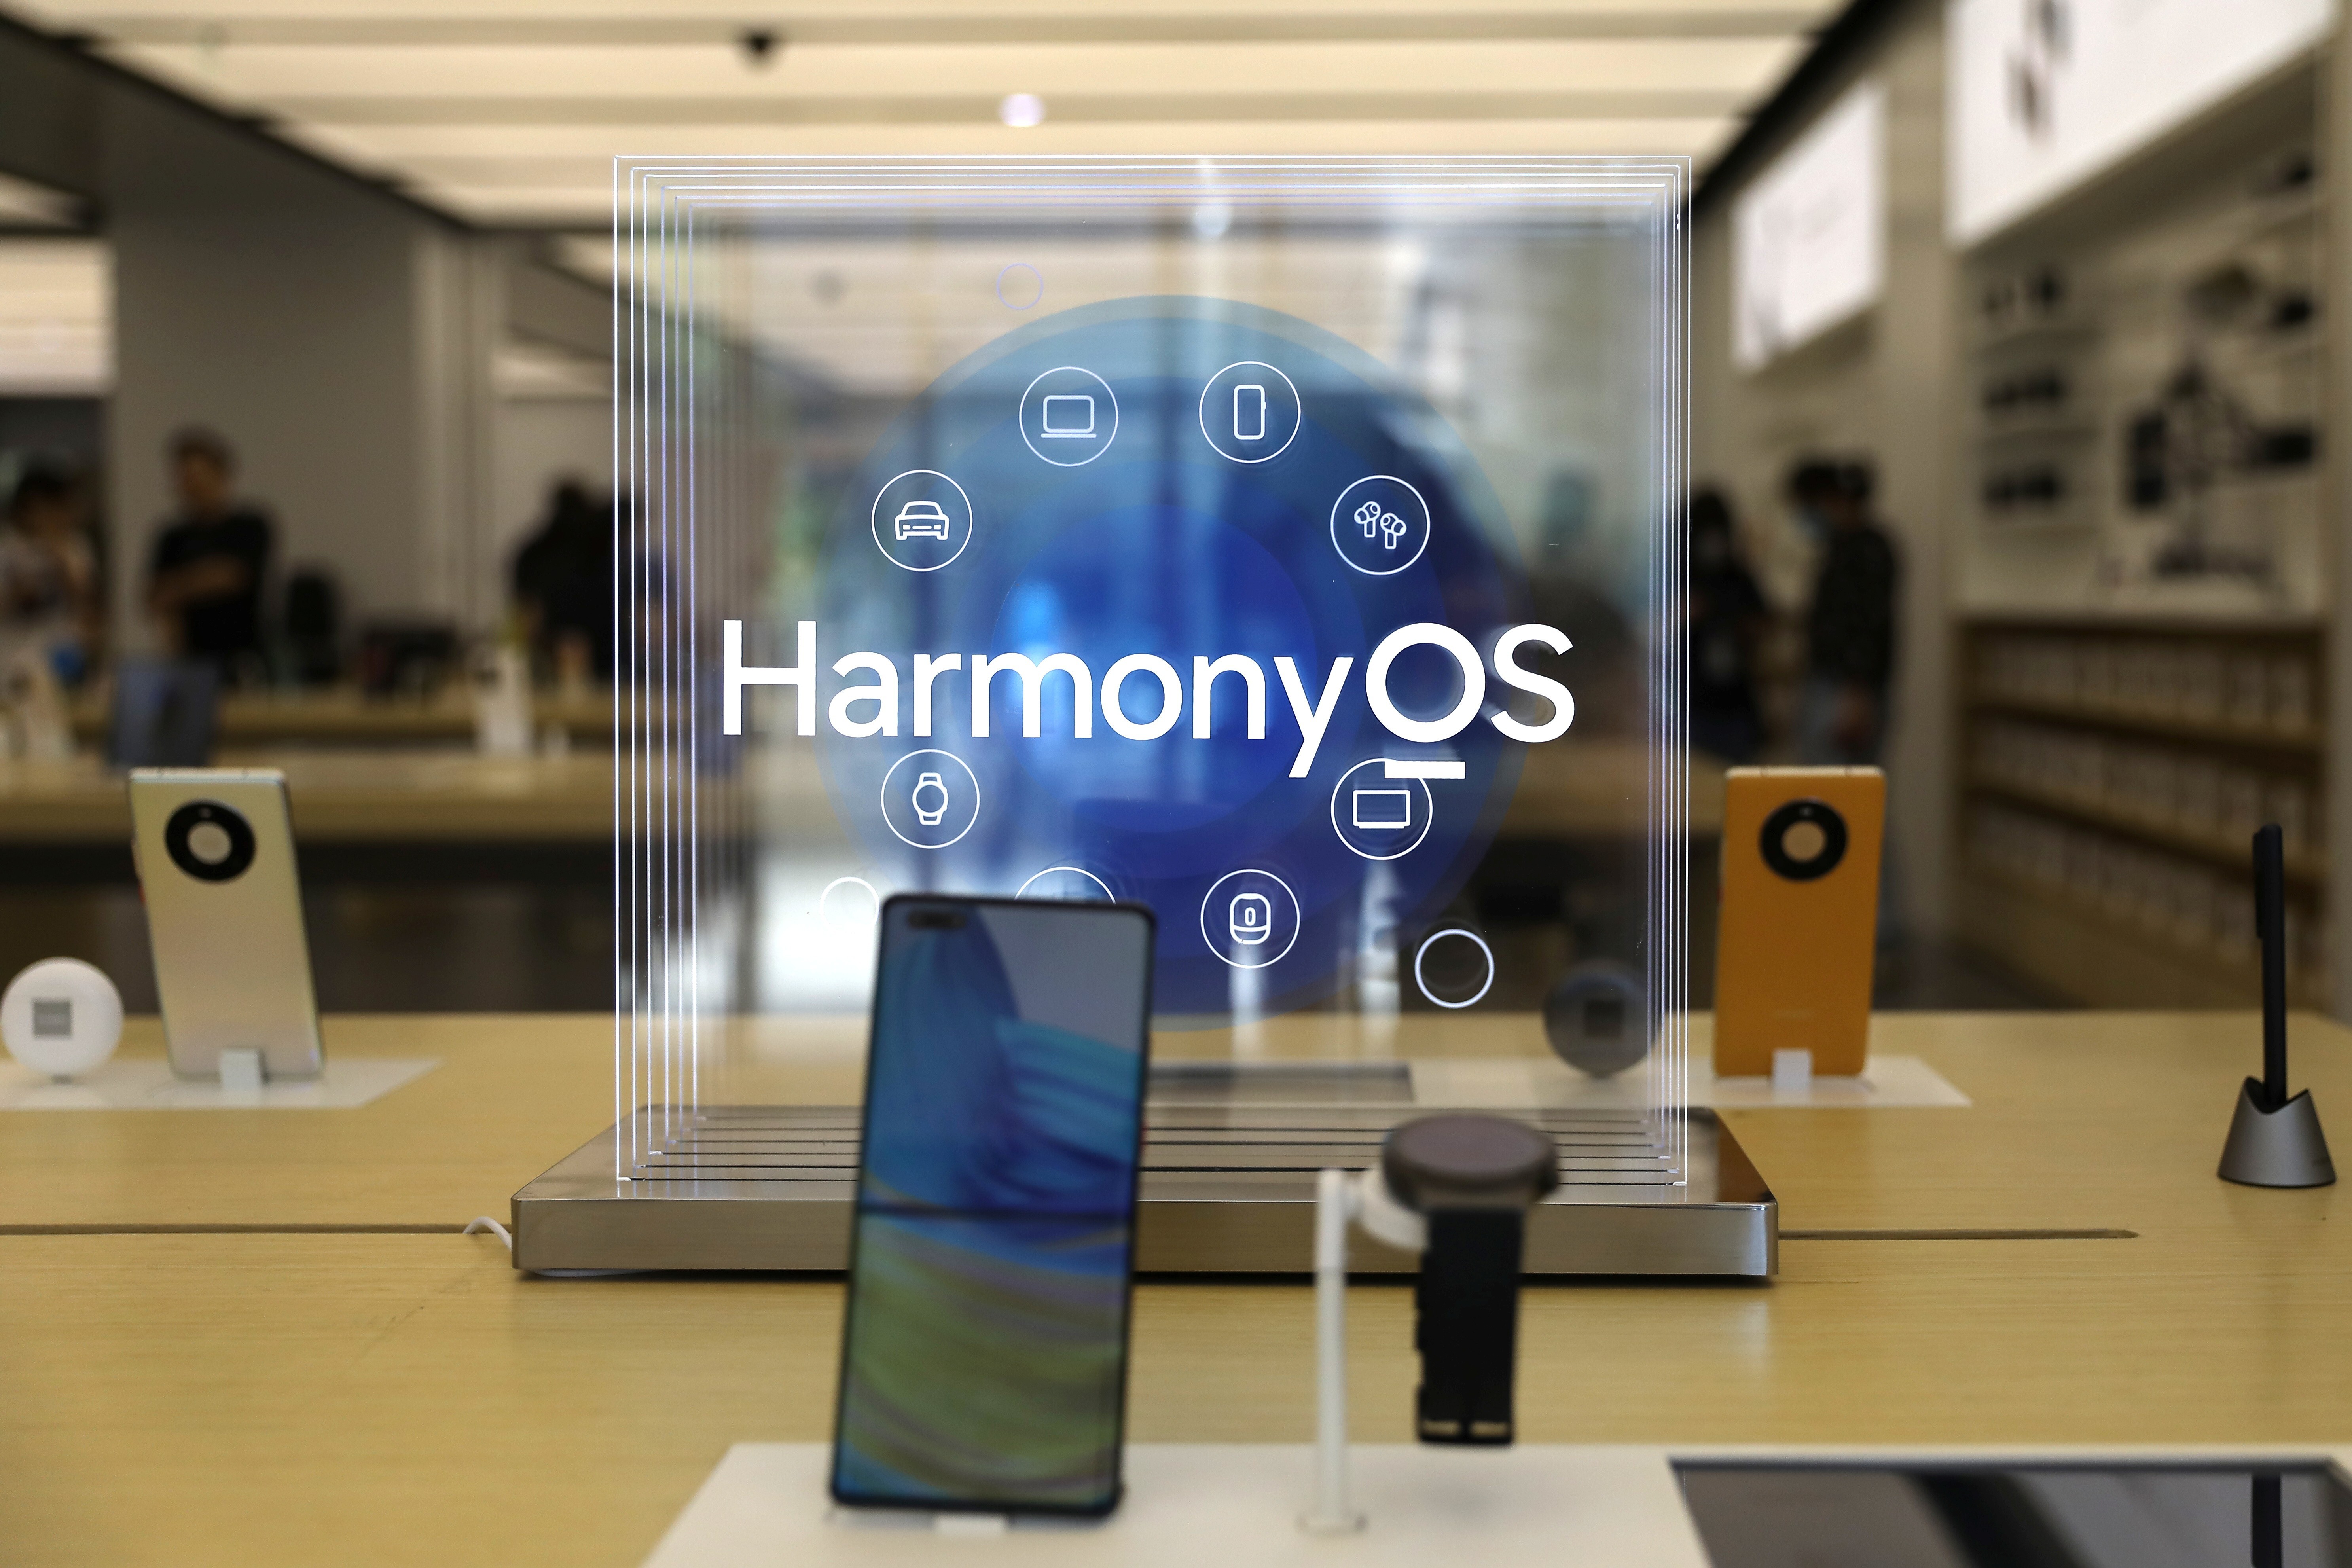 Huawei Technologies Co’s Mate 40 smartphone, installed with its HarmonyOS 2 mobile platform, is displayed at one of the company’s stores in Beijing on June 3, 2021. Photo: Reuters